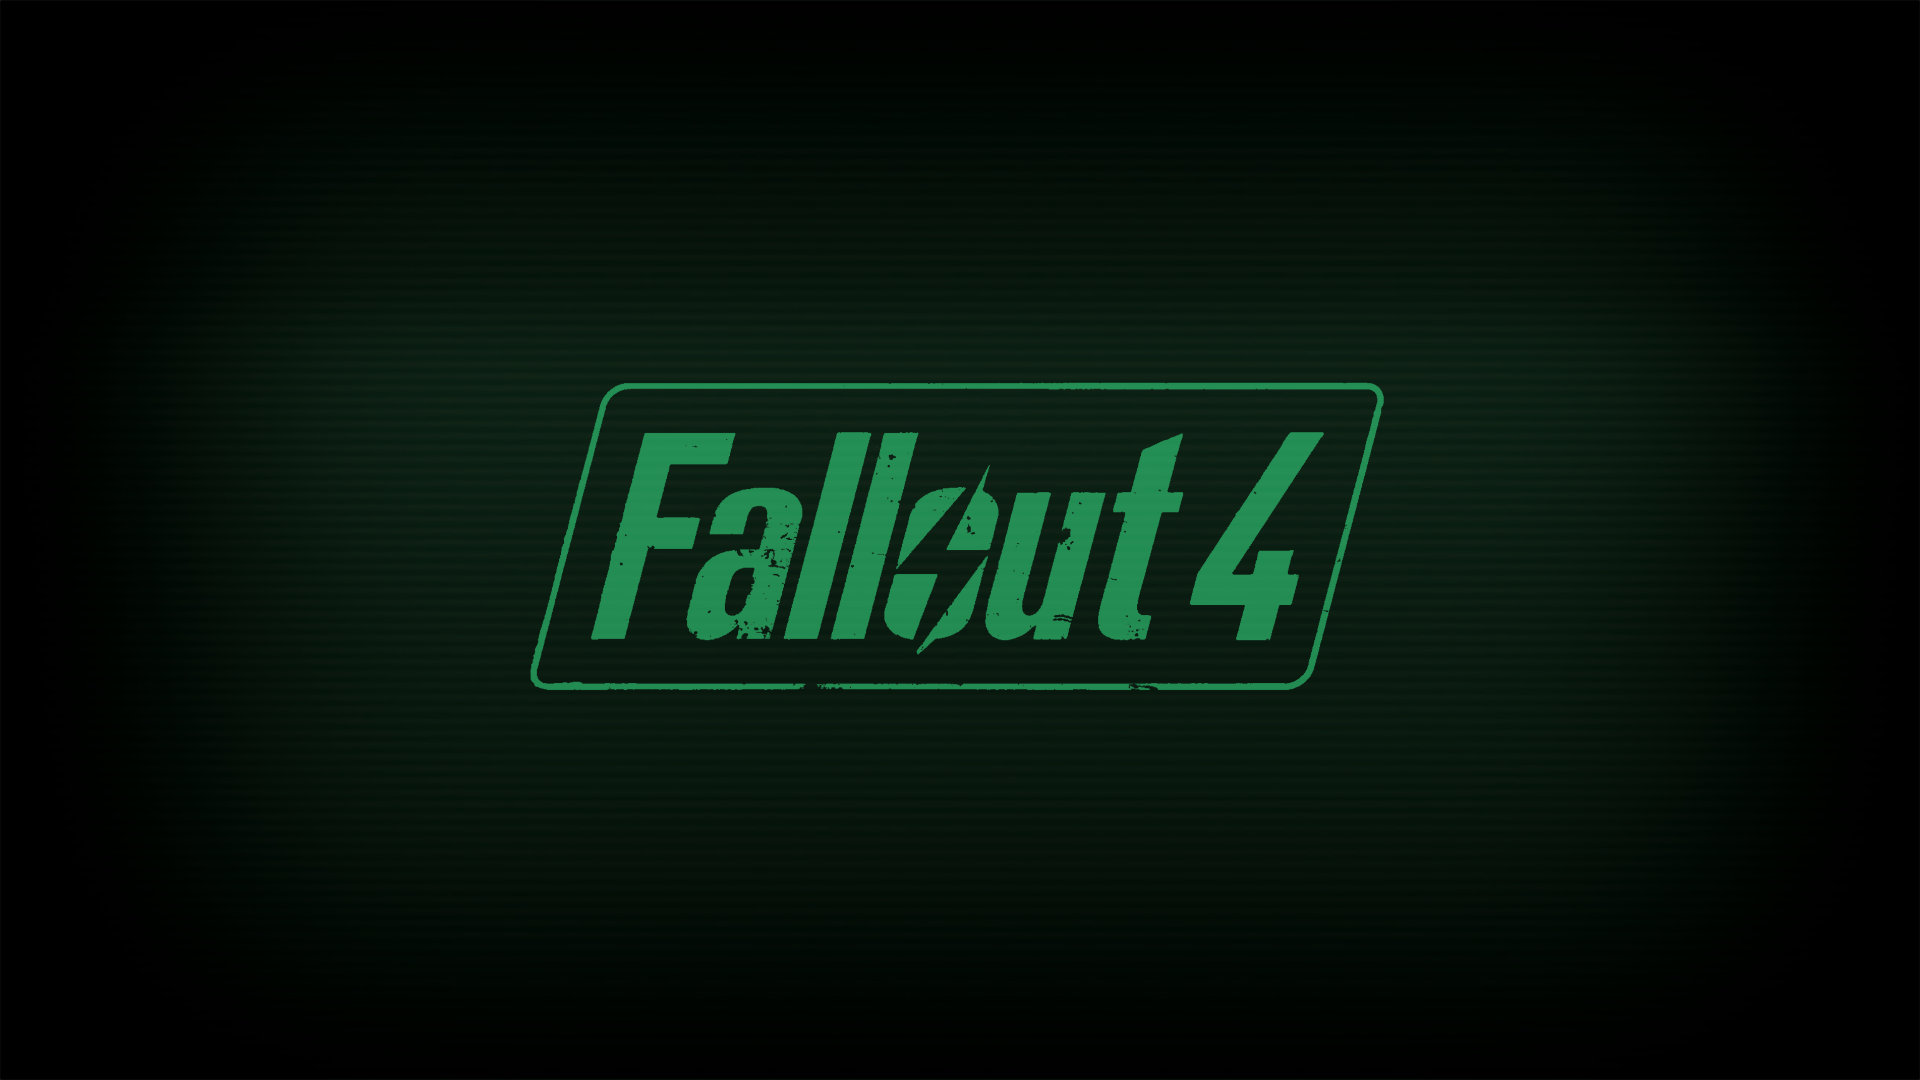 I made a few simple Fallout wallpaper from the new Fallout